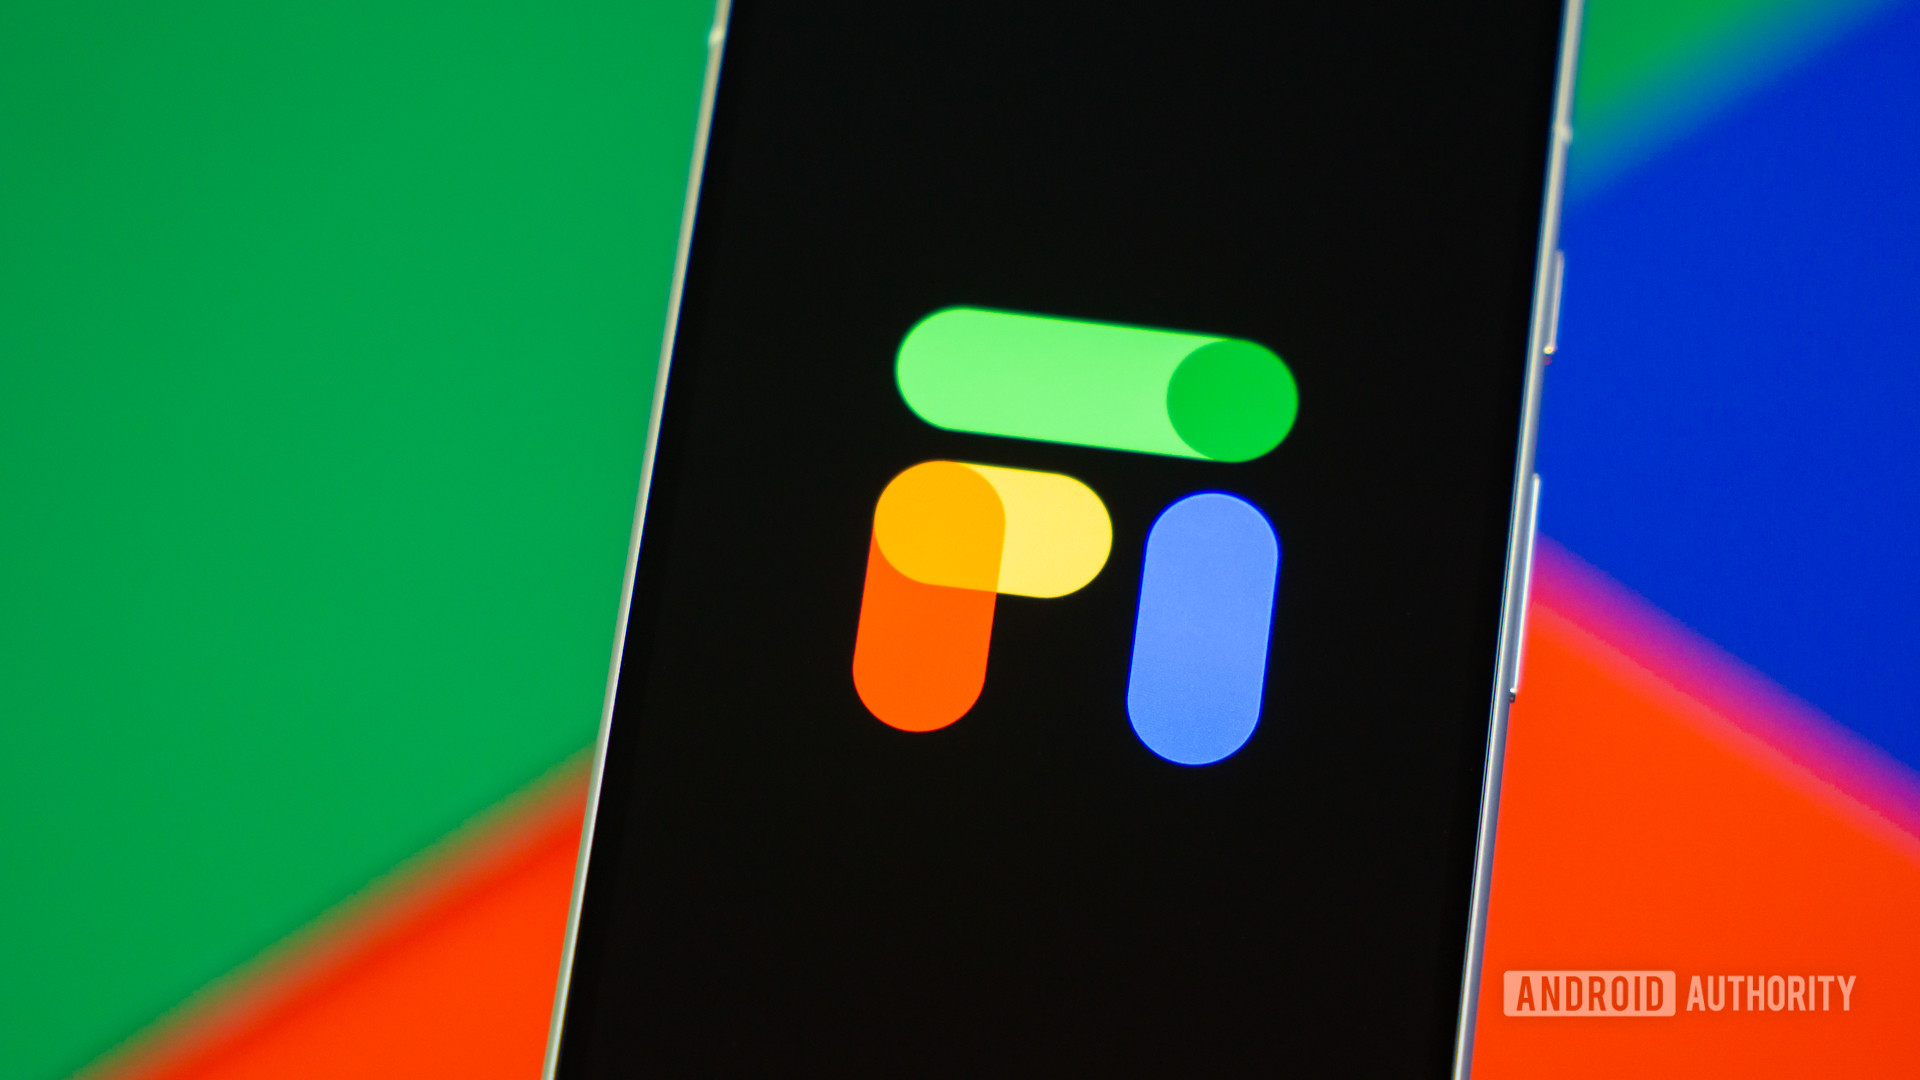 Stock photo of Google Fi logo on phone with colorful background 6